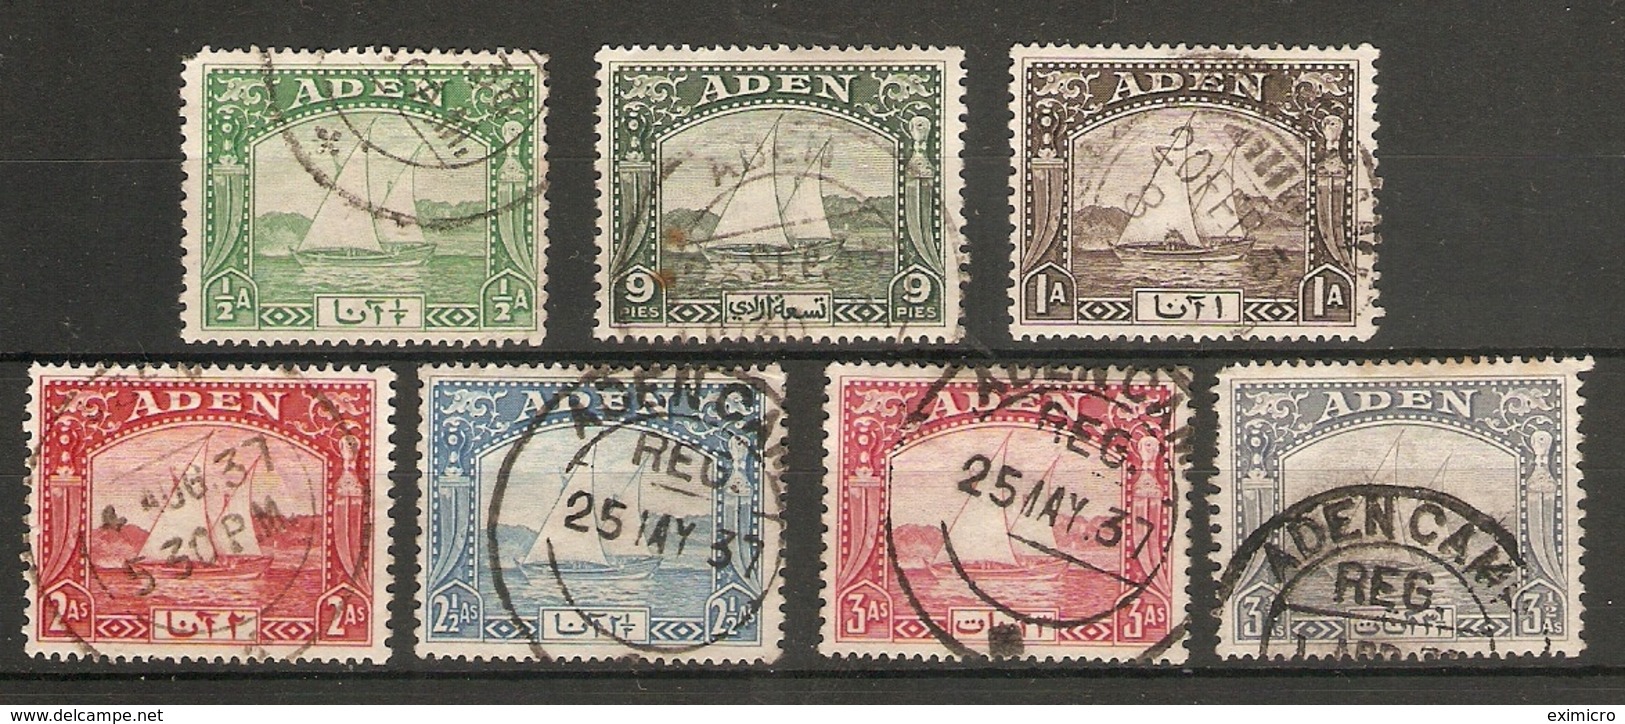 ADEN 1937 DHOW SET TO 3½a SG 1/7 FINE USED Cat £29 - Aden (1854-1963)